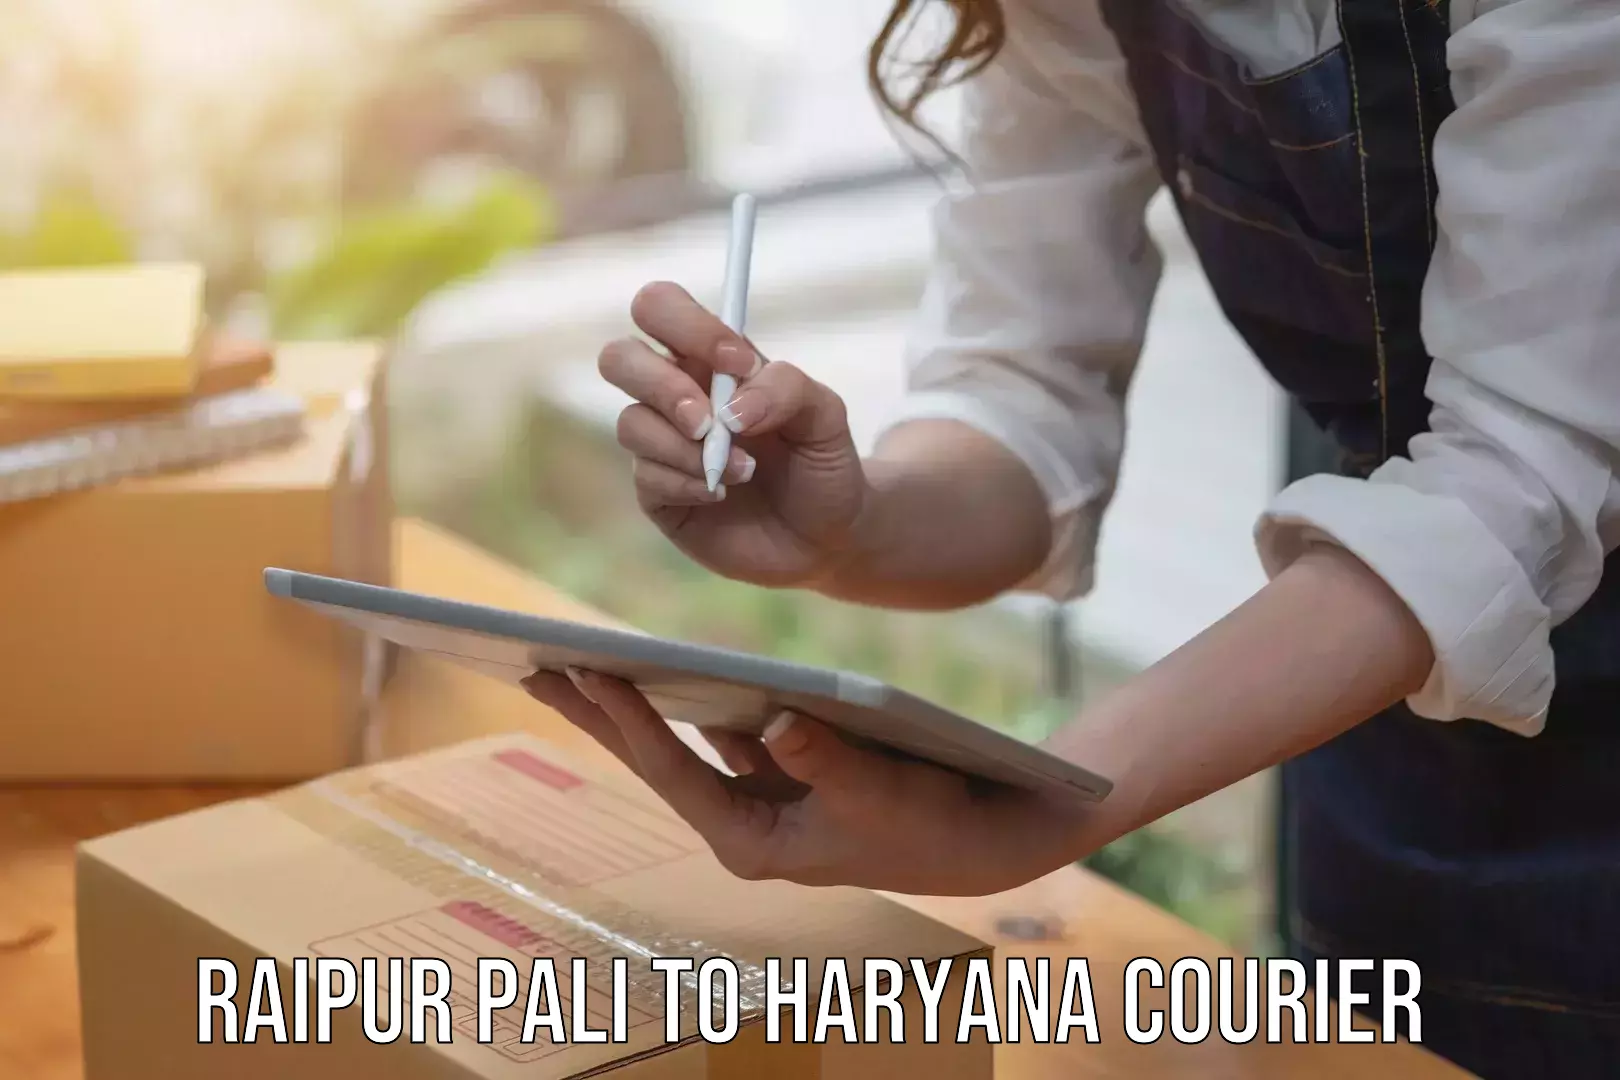 International courier networks Raipur Pali to Nuh